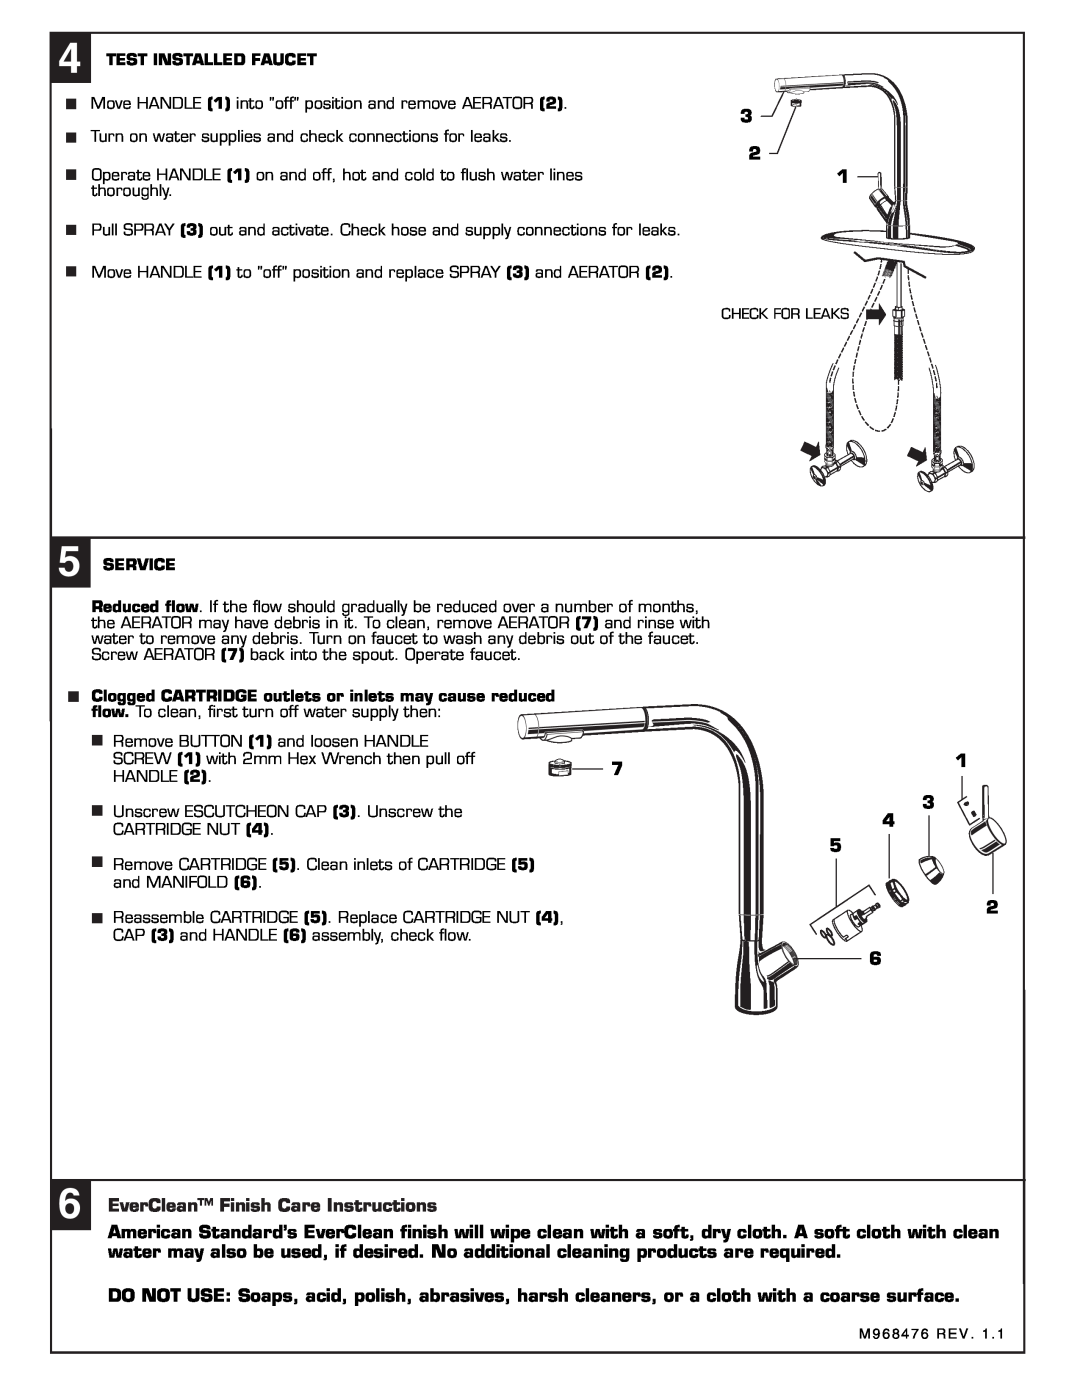 American Standard 4147.100 installation instructions Test Installed Faucet, Service, EverClean Finish Care Instructions 